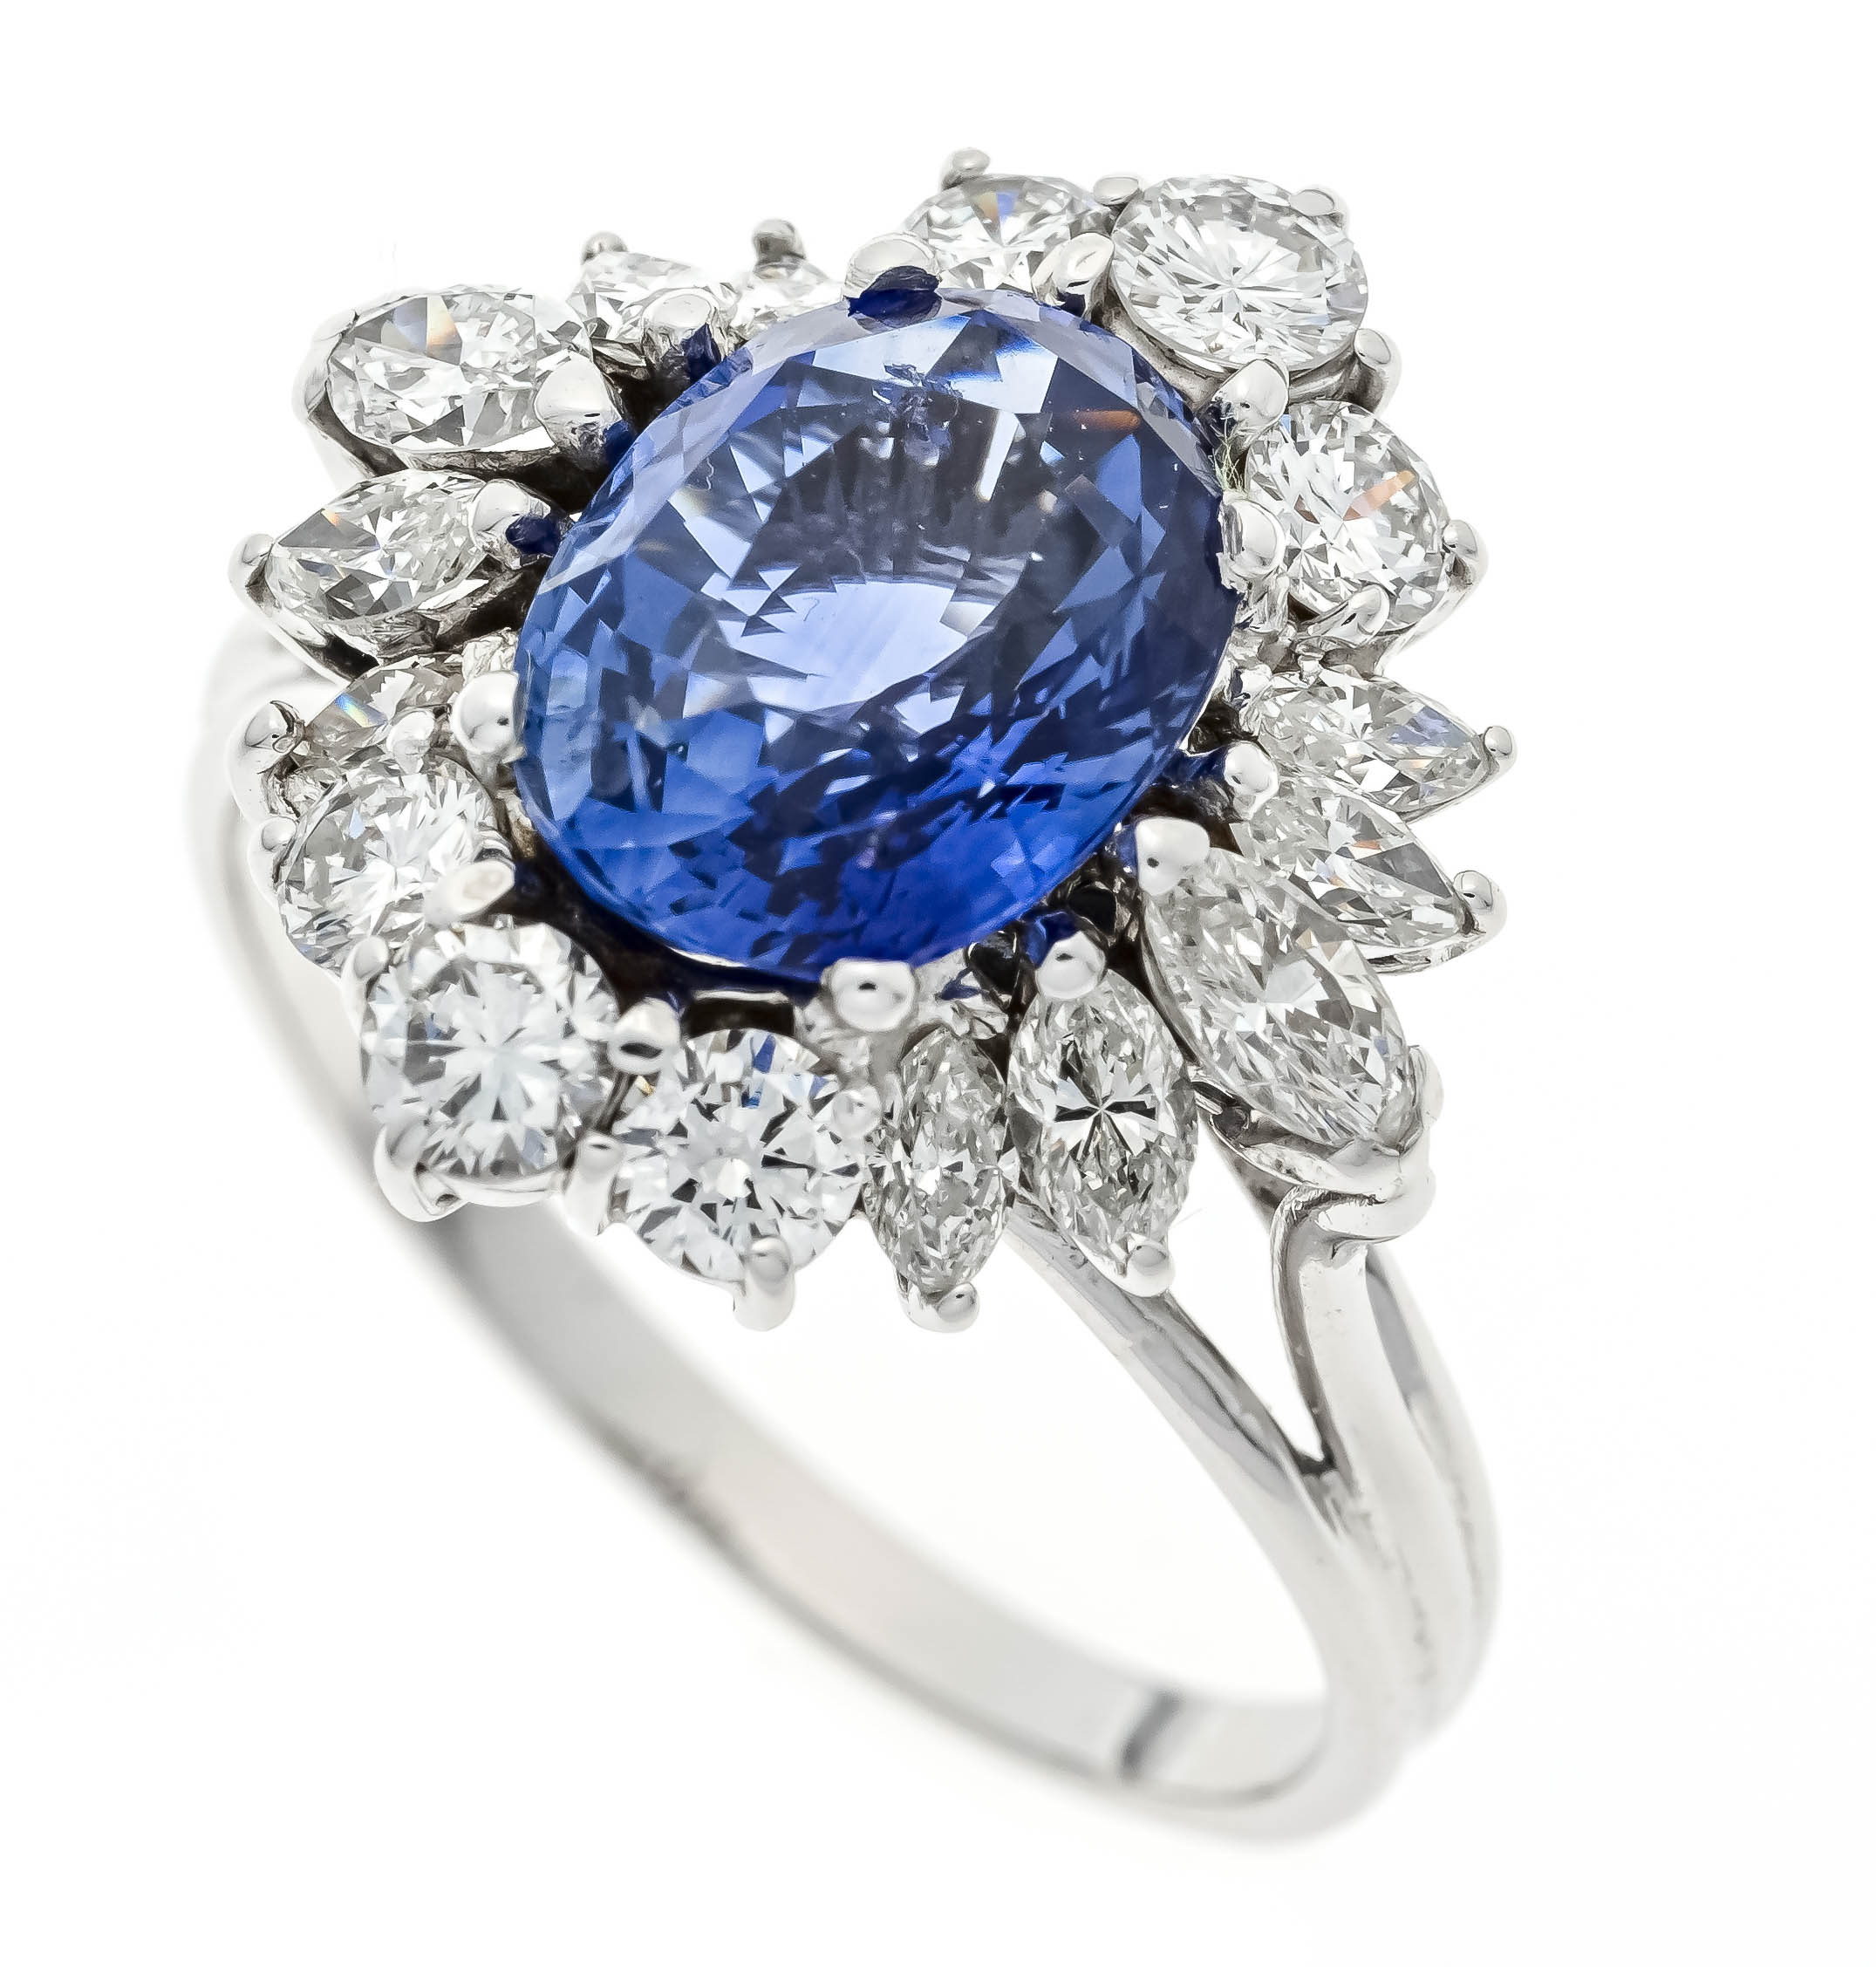 Sapphire-brilliant ring platinum tested, with an excellent oval faceted sapphire 3.50 ct in a fine